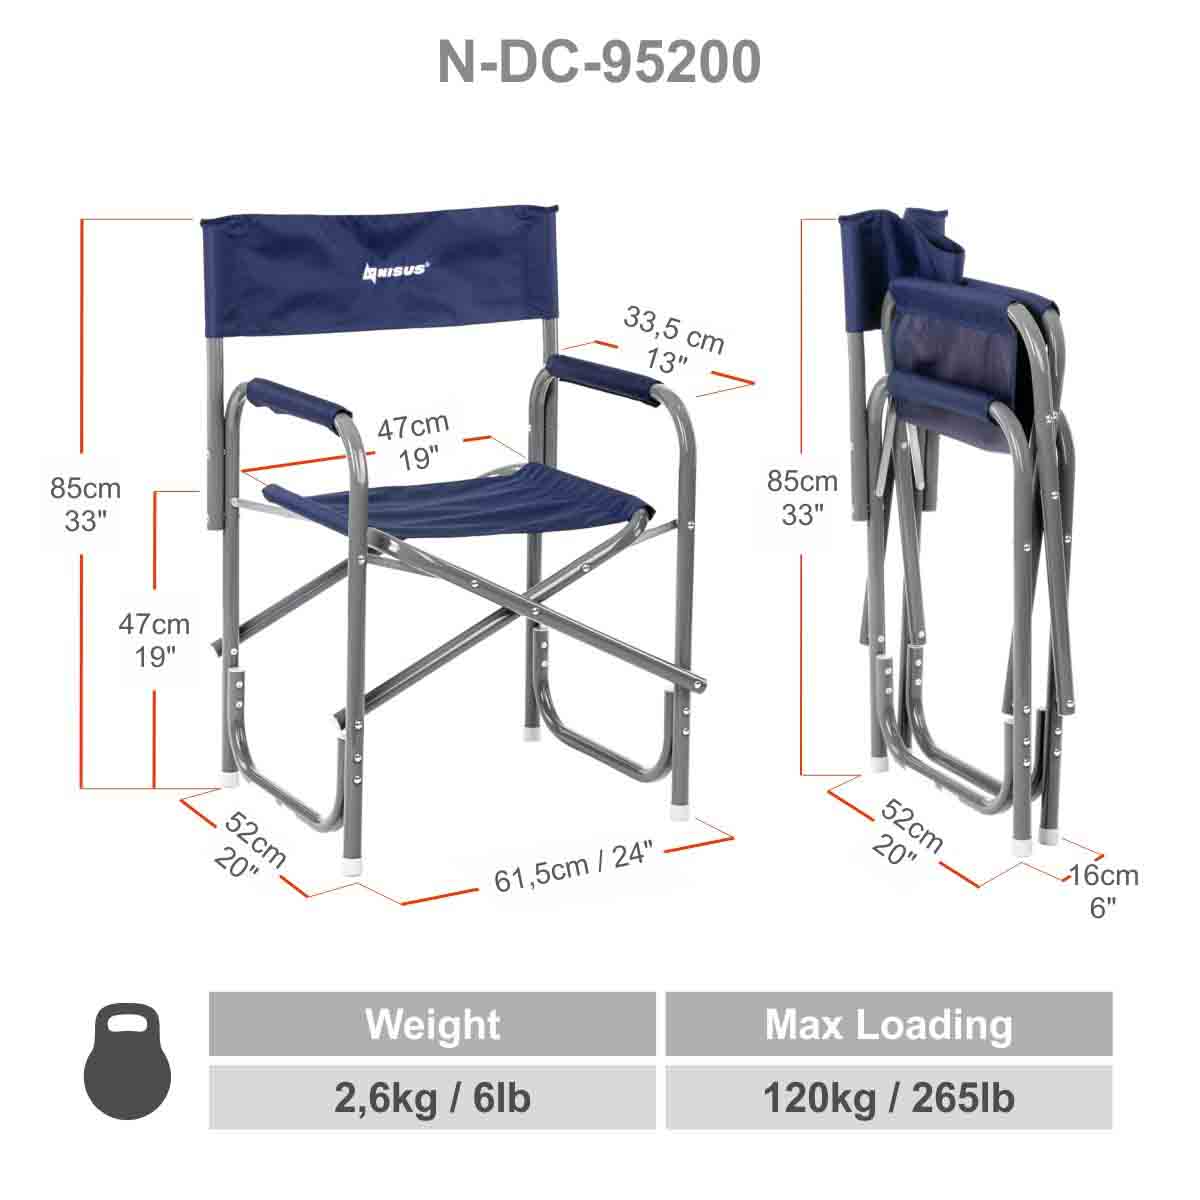 Nisus Blue Folding Aluminum Director's Chair for Camping